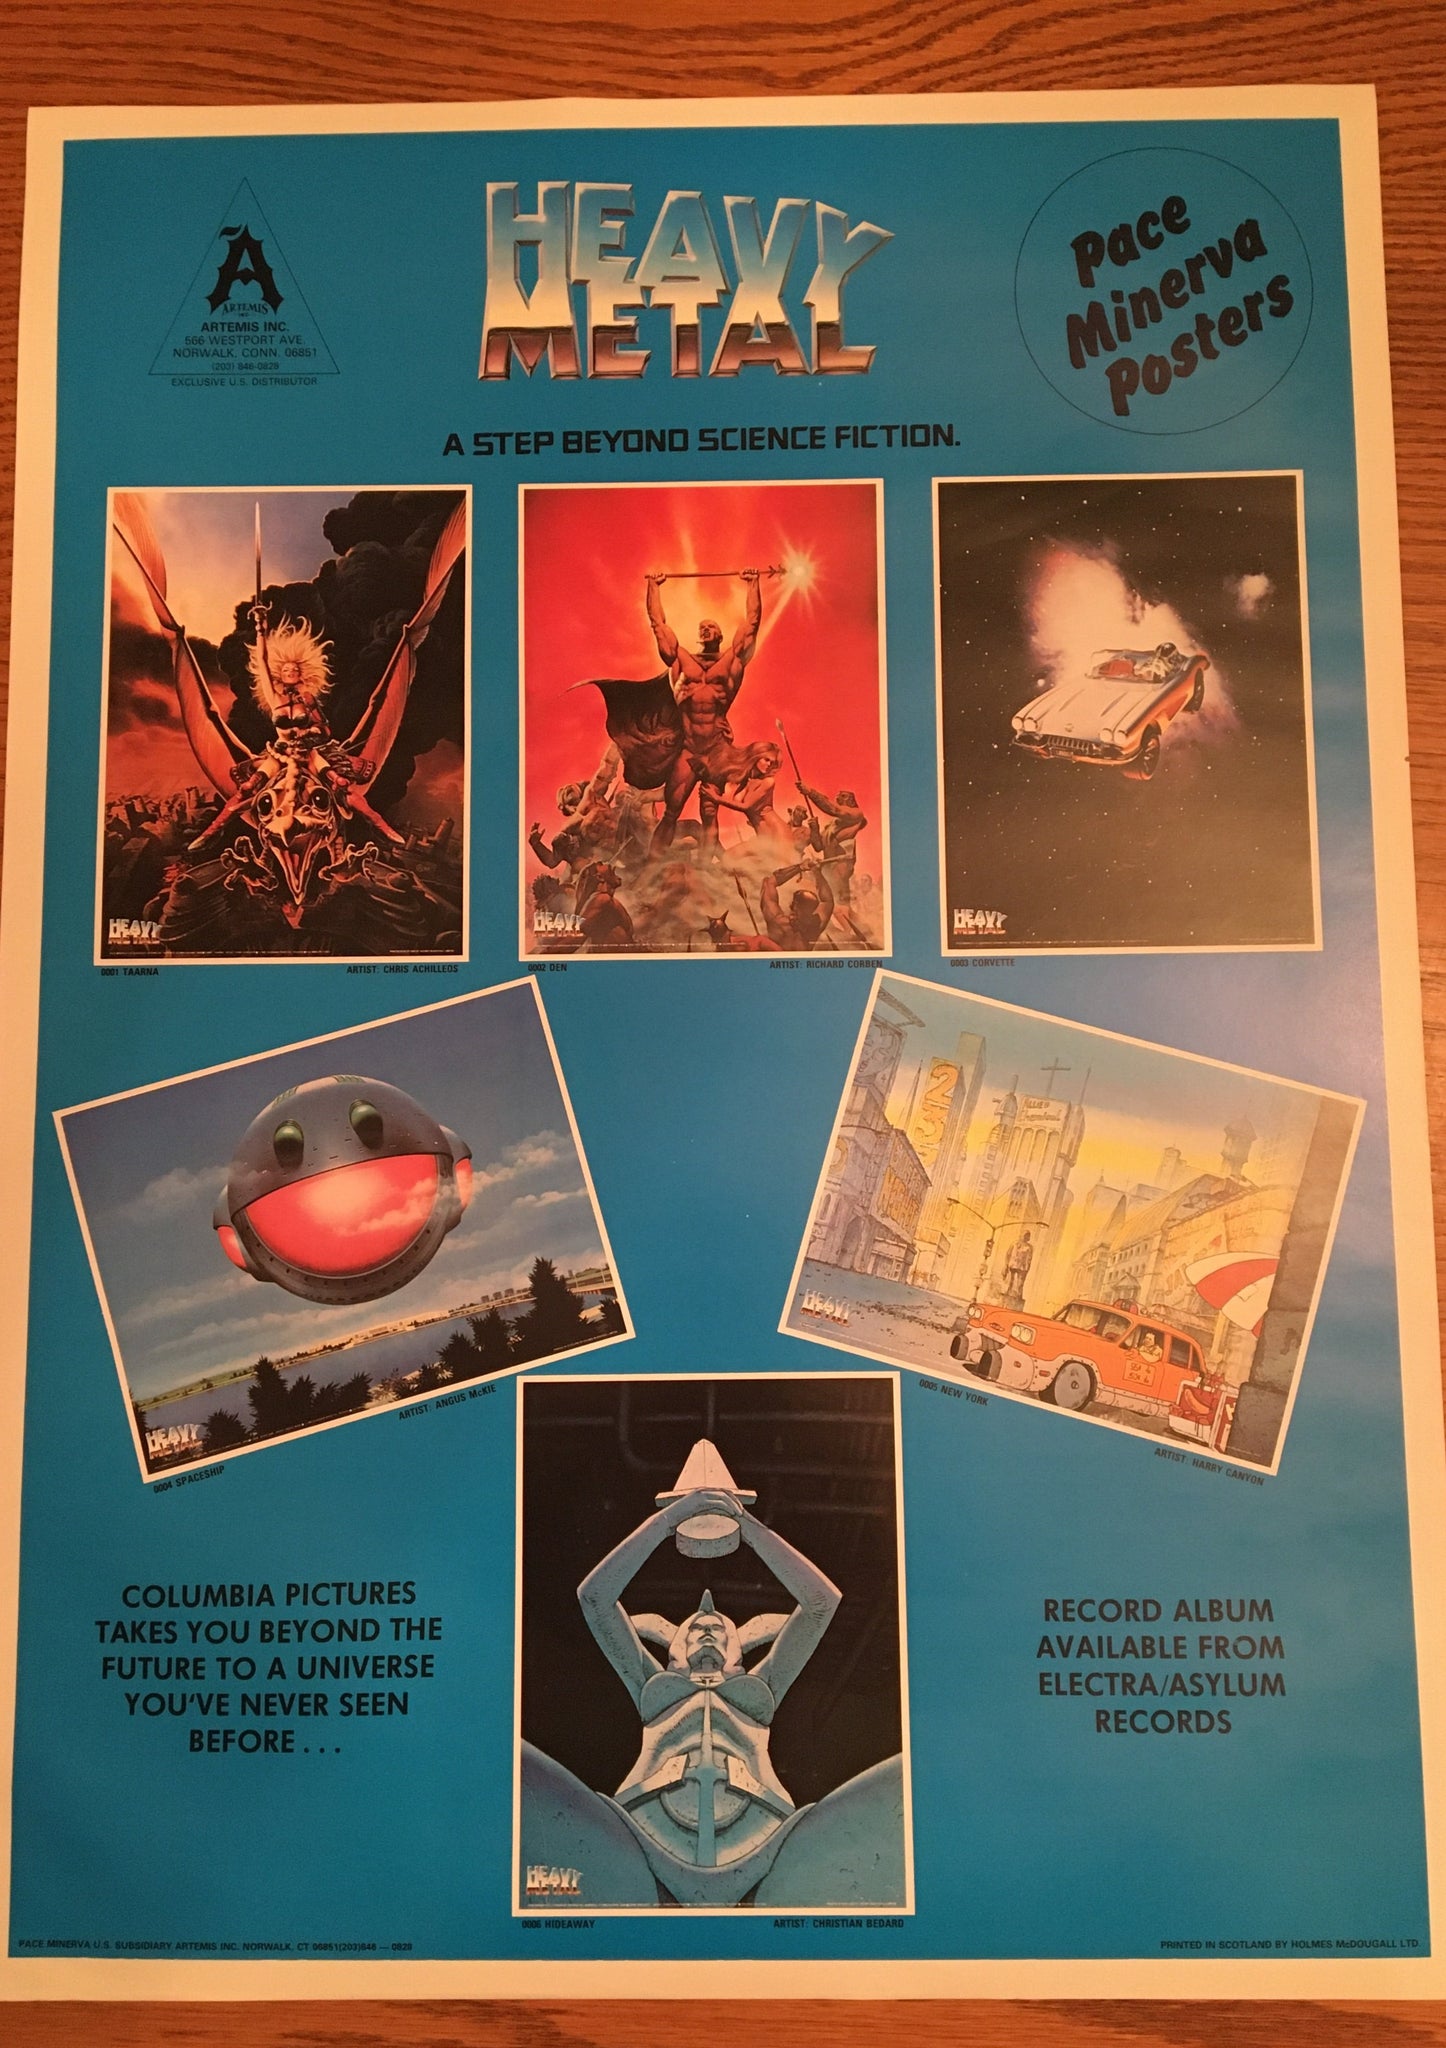 Heavy Metal- promotional poster